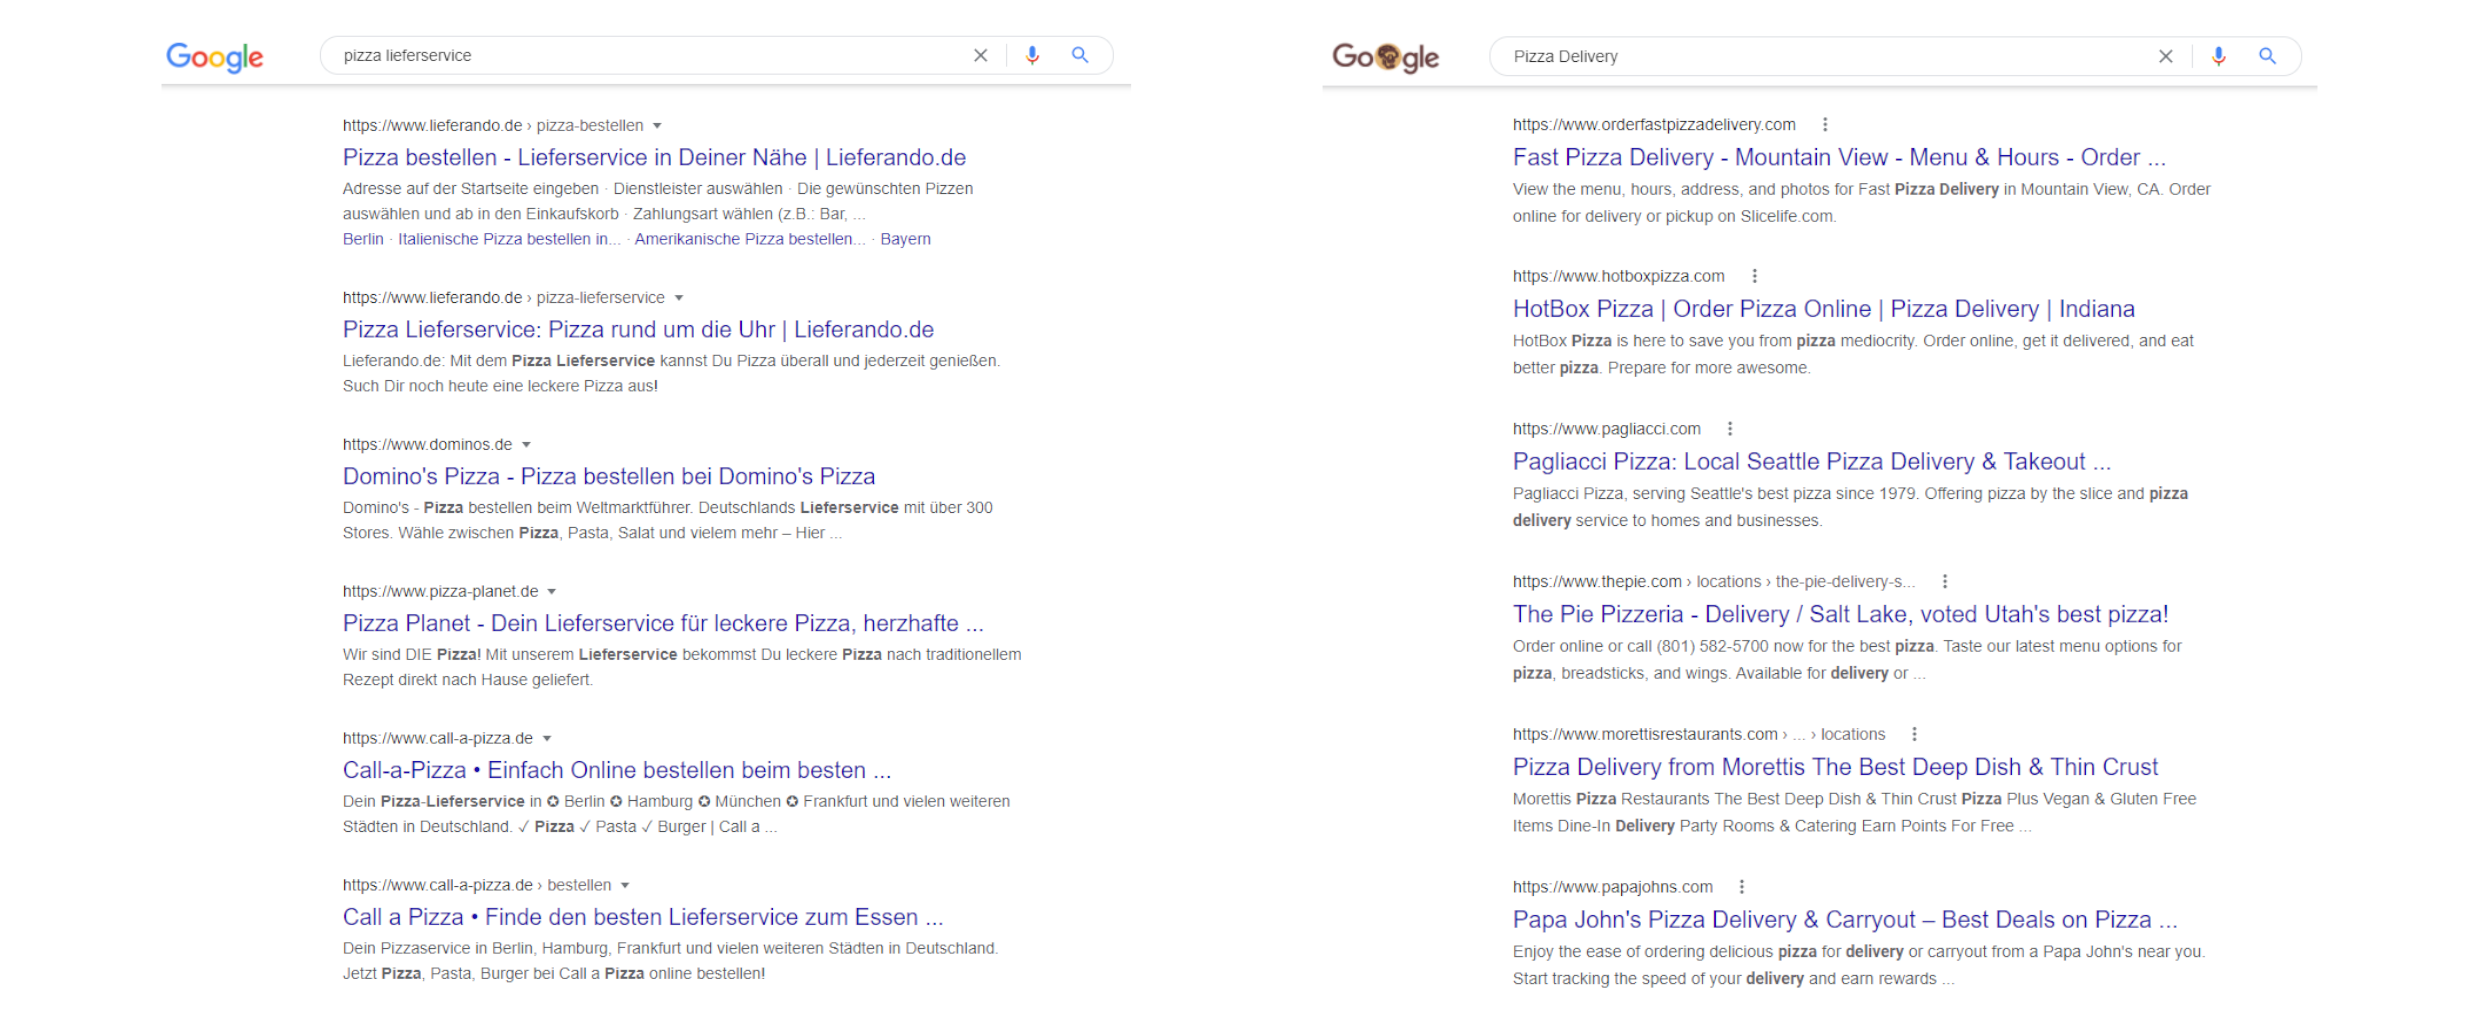 The graphic shows geo-targeting based on the search term "pizza delivery service" in Germany (left in the image) and the USA (right in the image). Under the entered search term, the respective SERPs of the region are displayed.